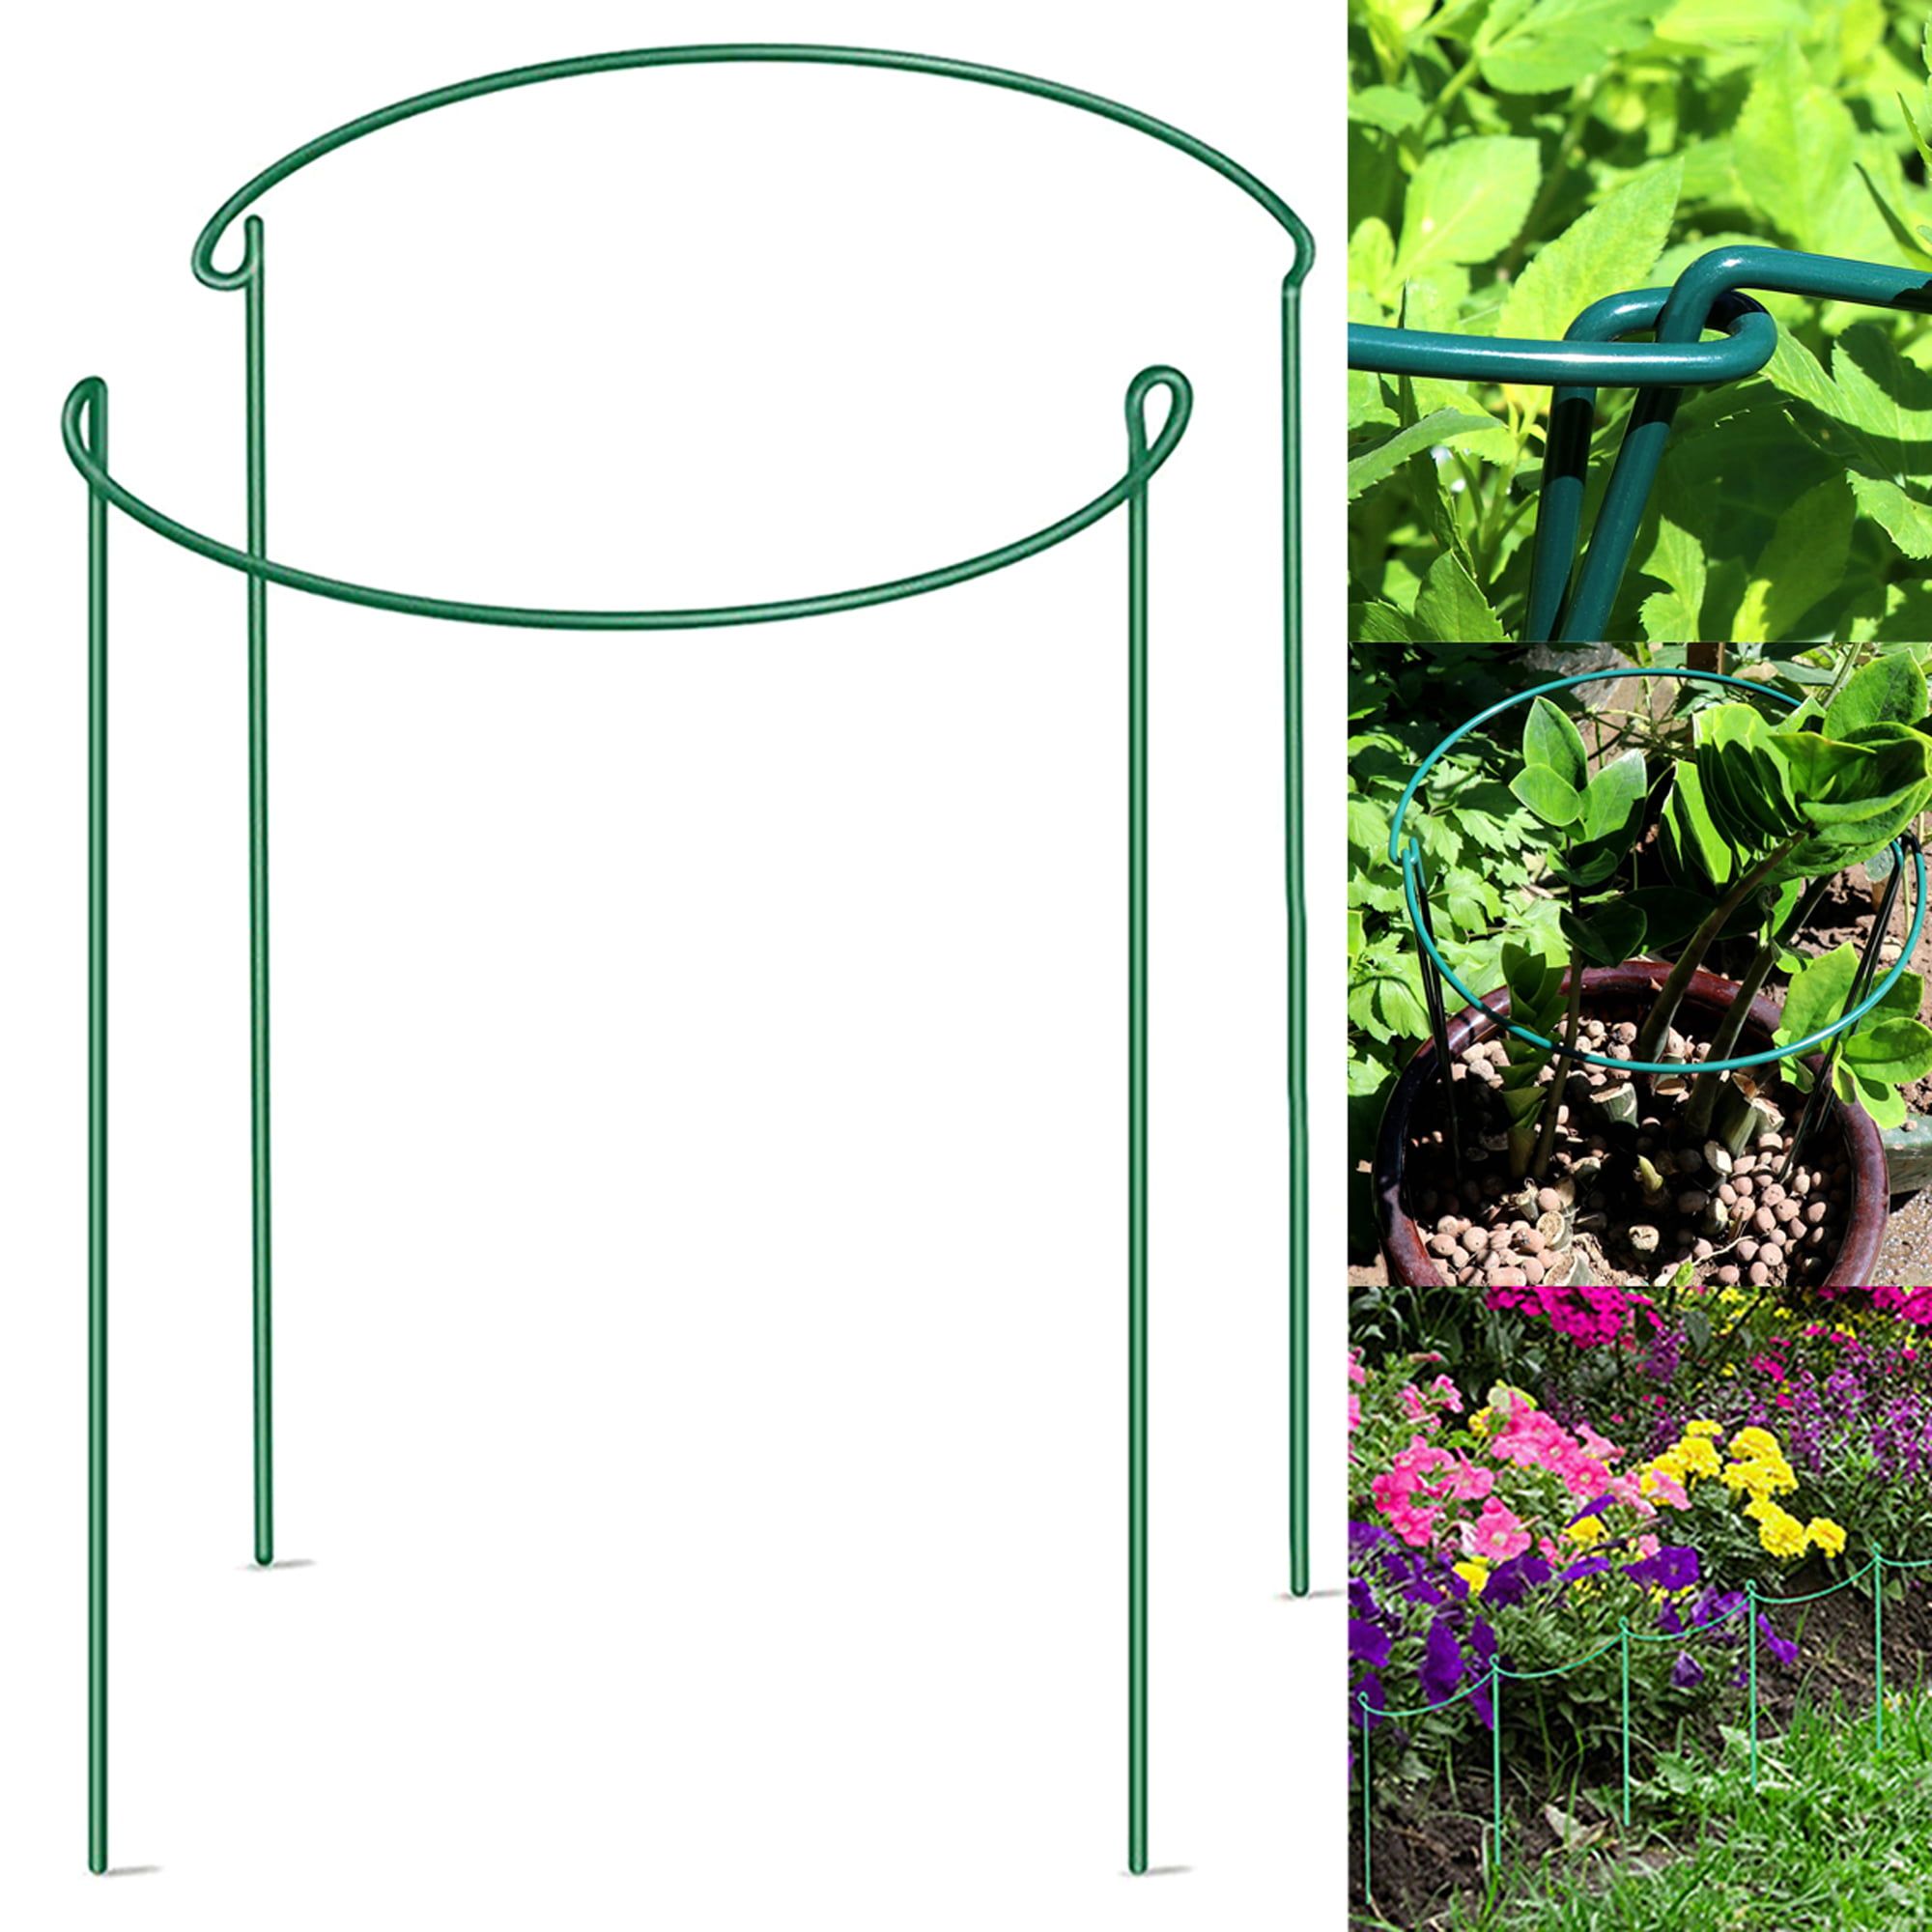 Details about   Plant Support Stake Half Round Metal Garden Plant Support Ring Steel w/ Plastic 